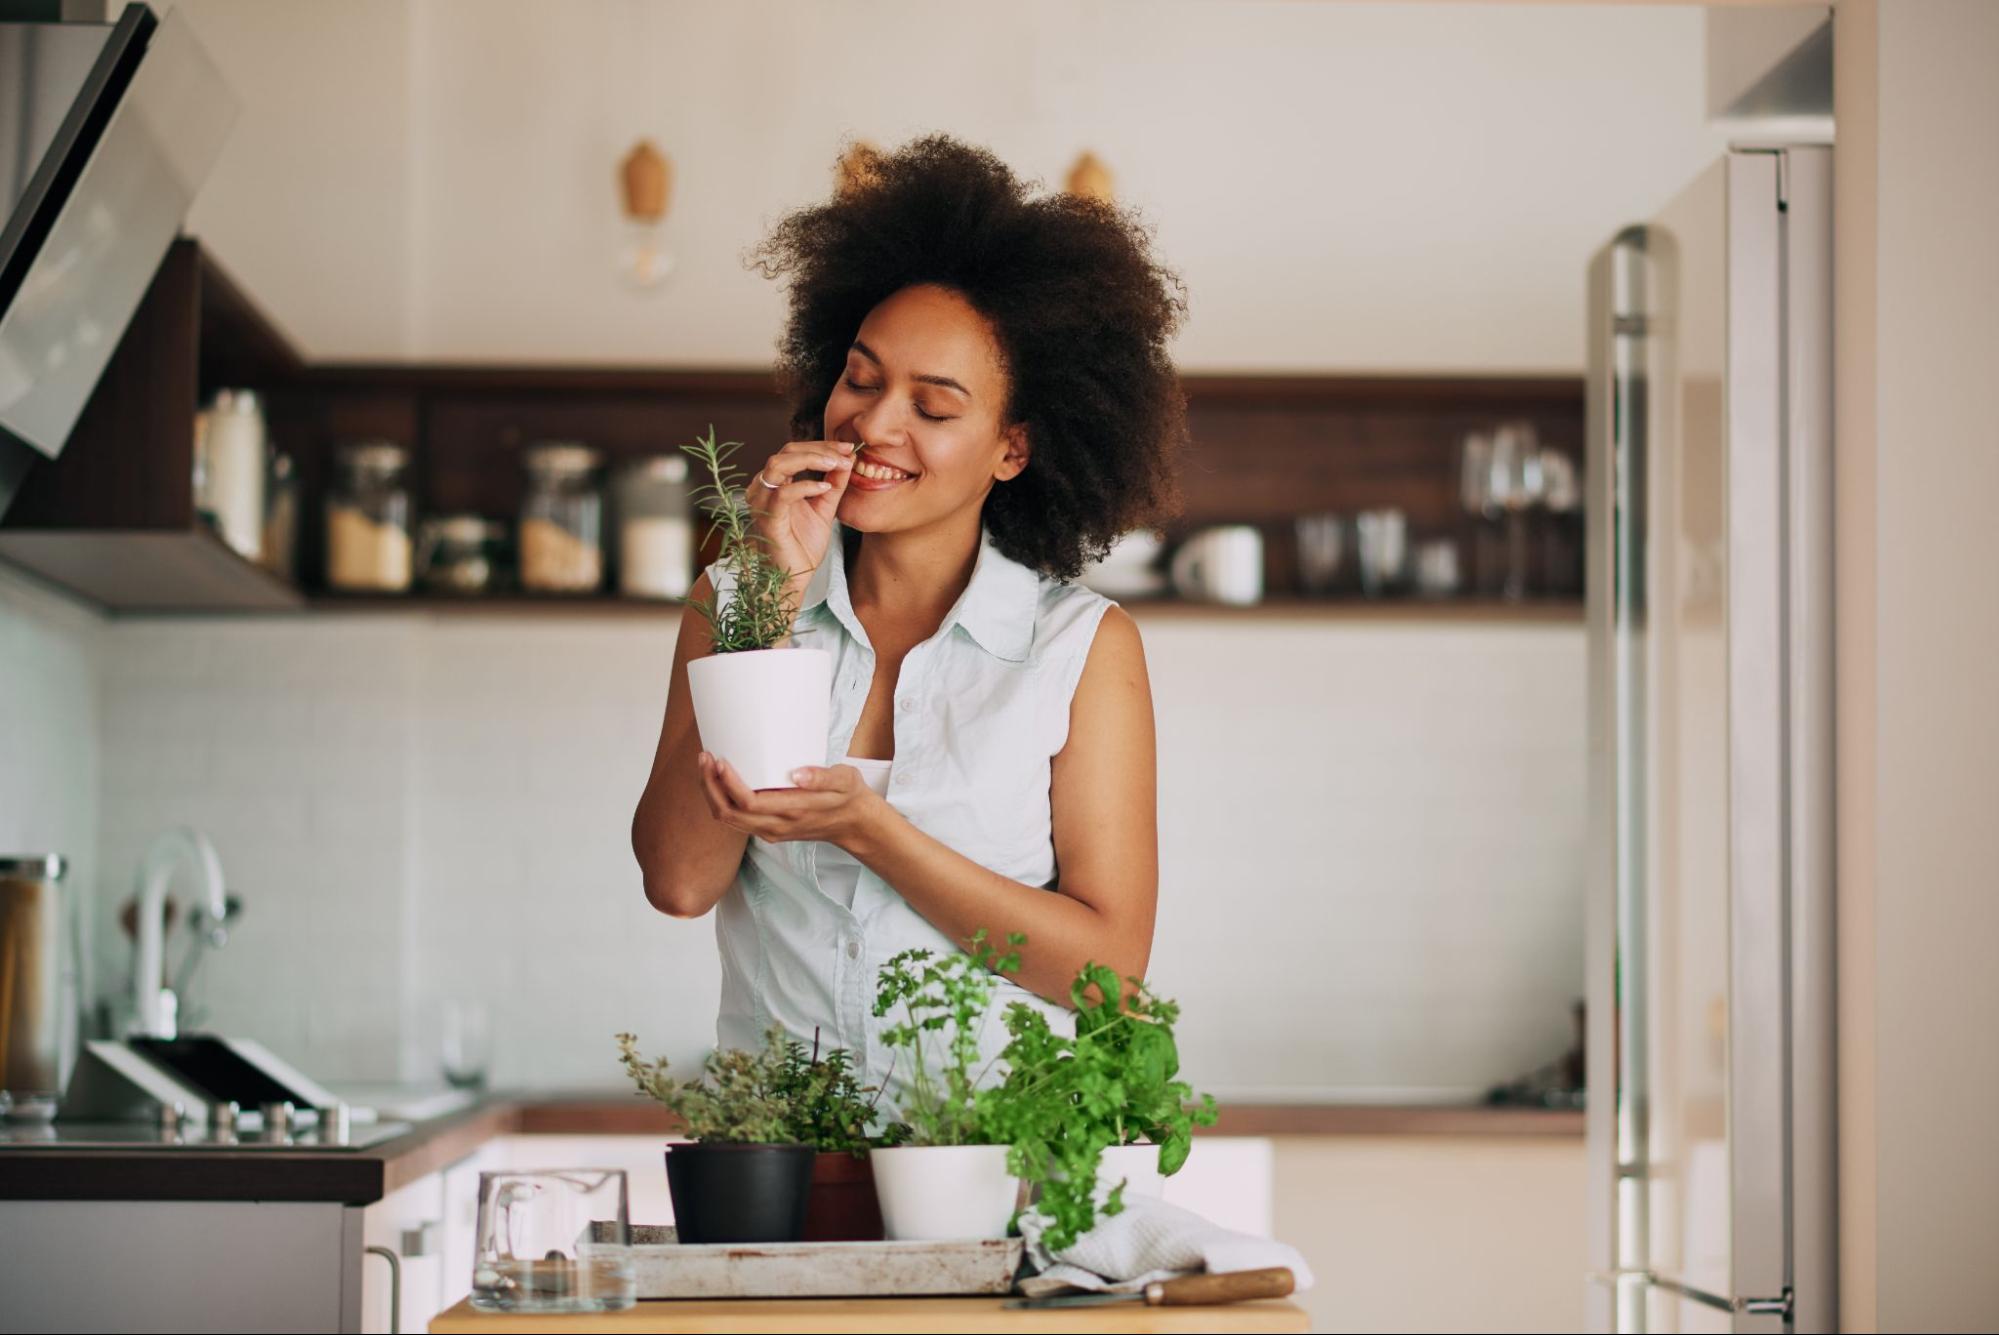 Young woman smells fresh herbs she grows in her kitchen to use when flavoring her dishes